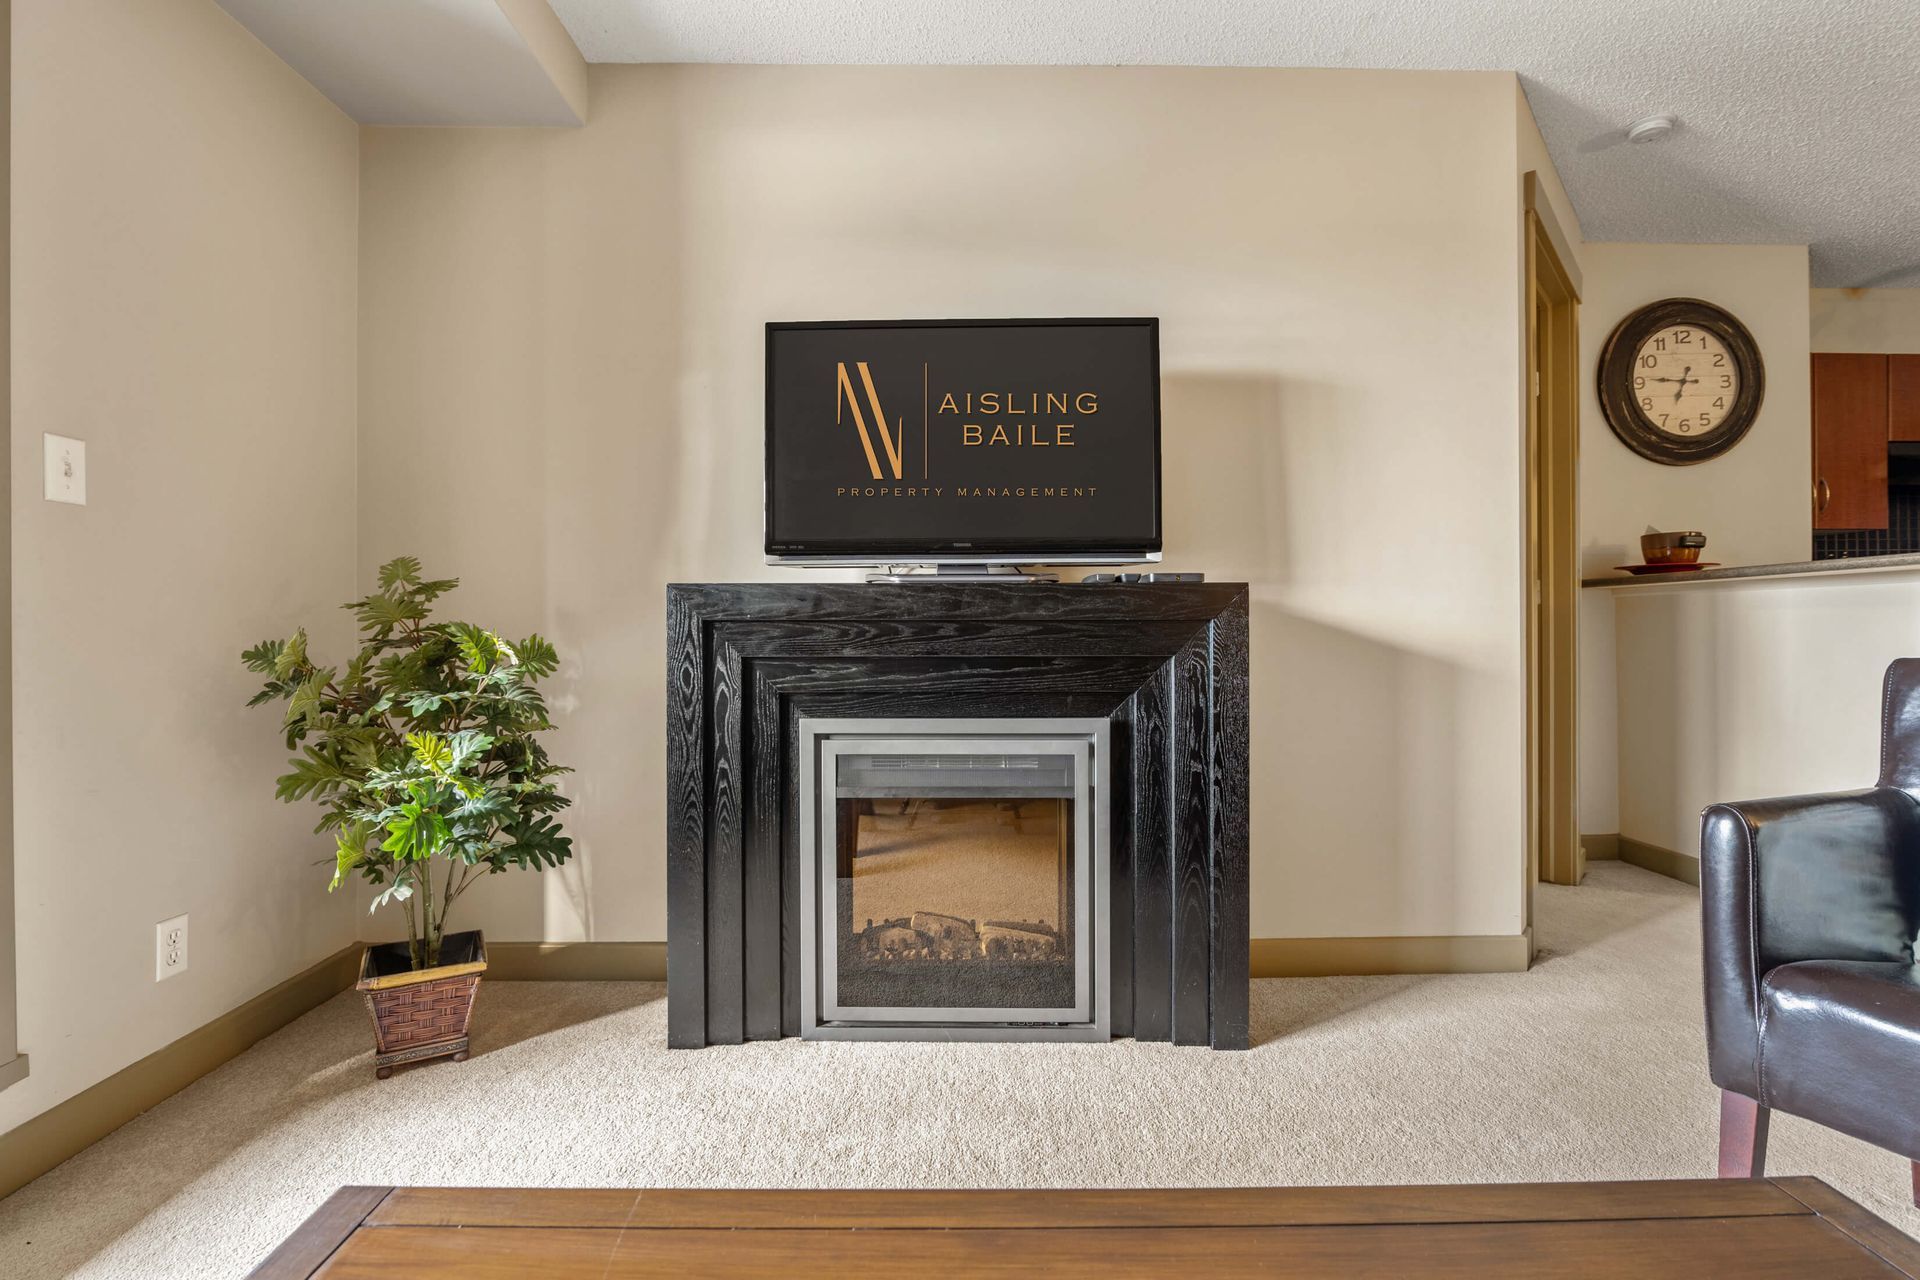 Fireplace at the Lake Windermere Pointe Condos in Invermere, BC managed by Aisling Baile Property Management